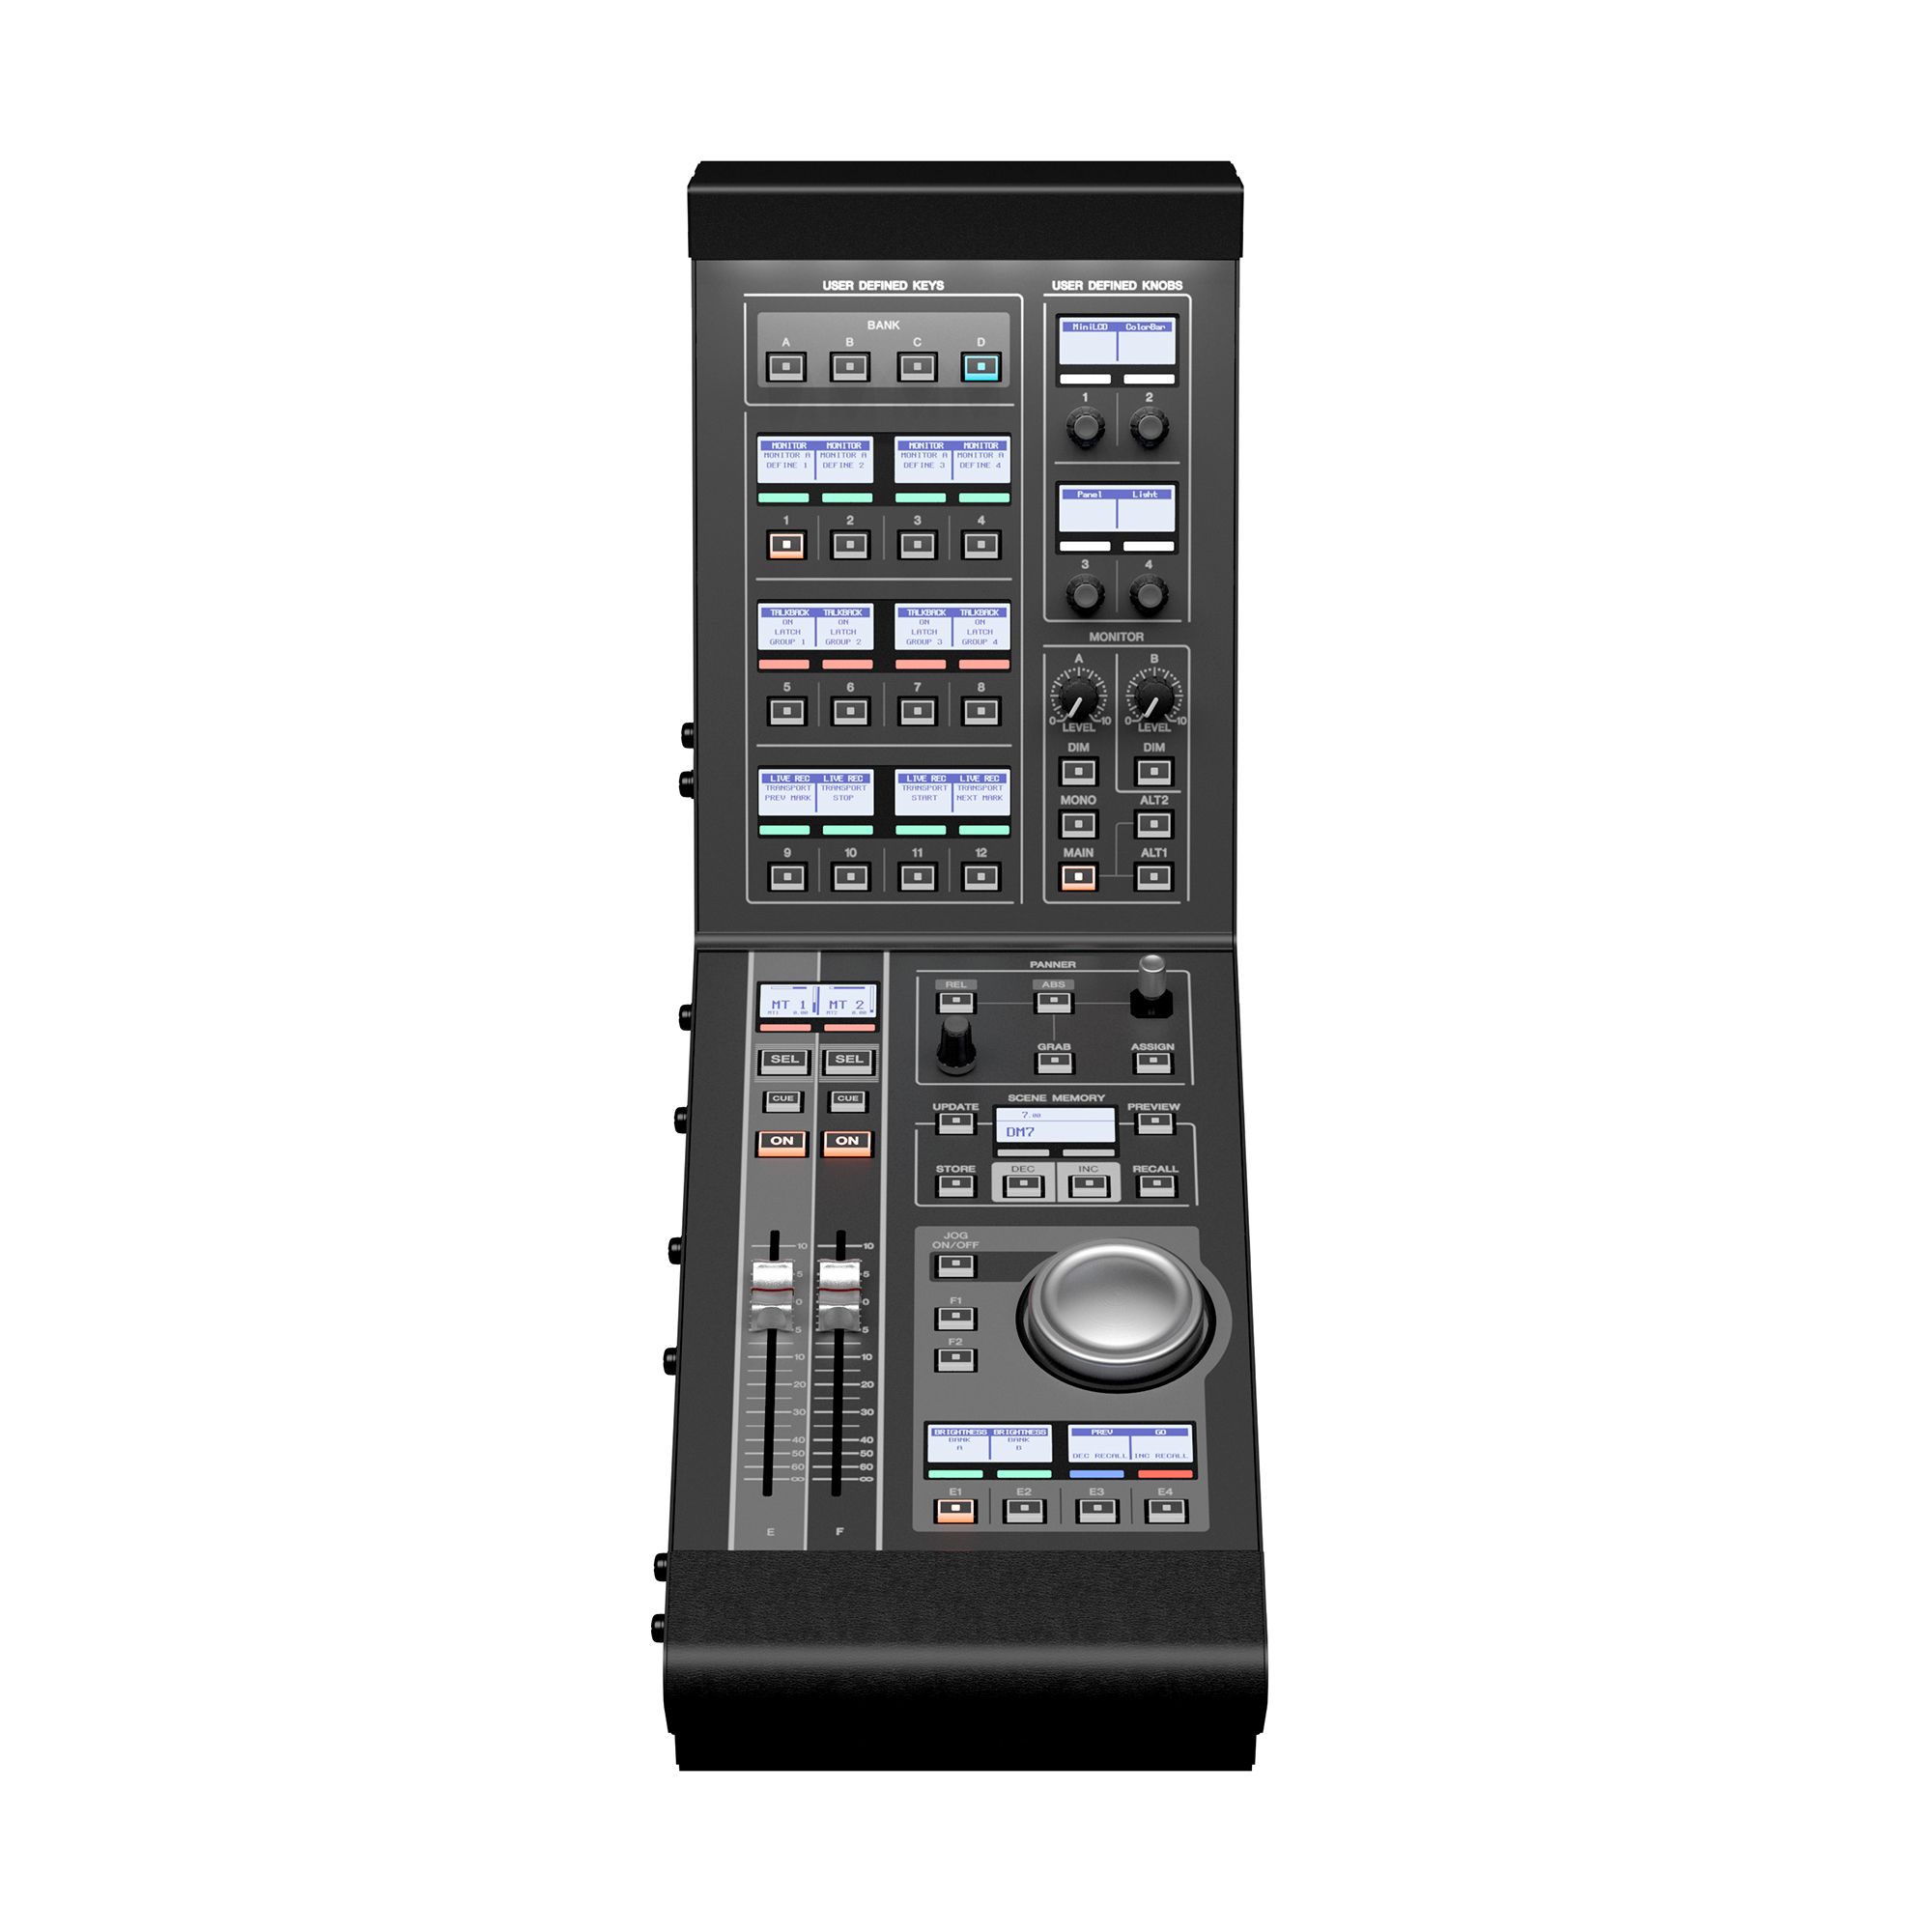 DM7 Series - Overview - Mixers - Professional Audio - Products 